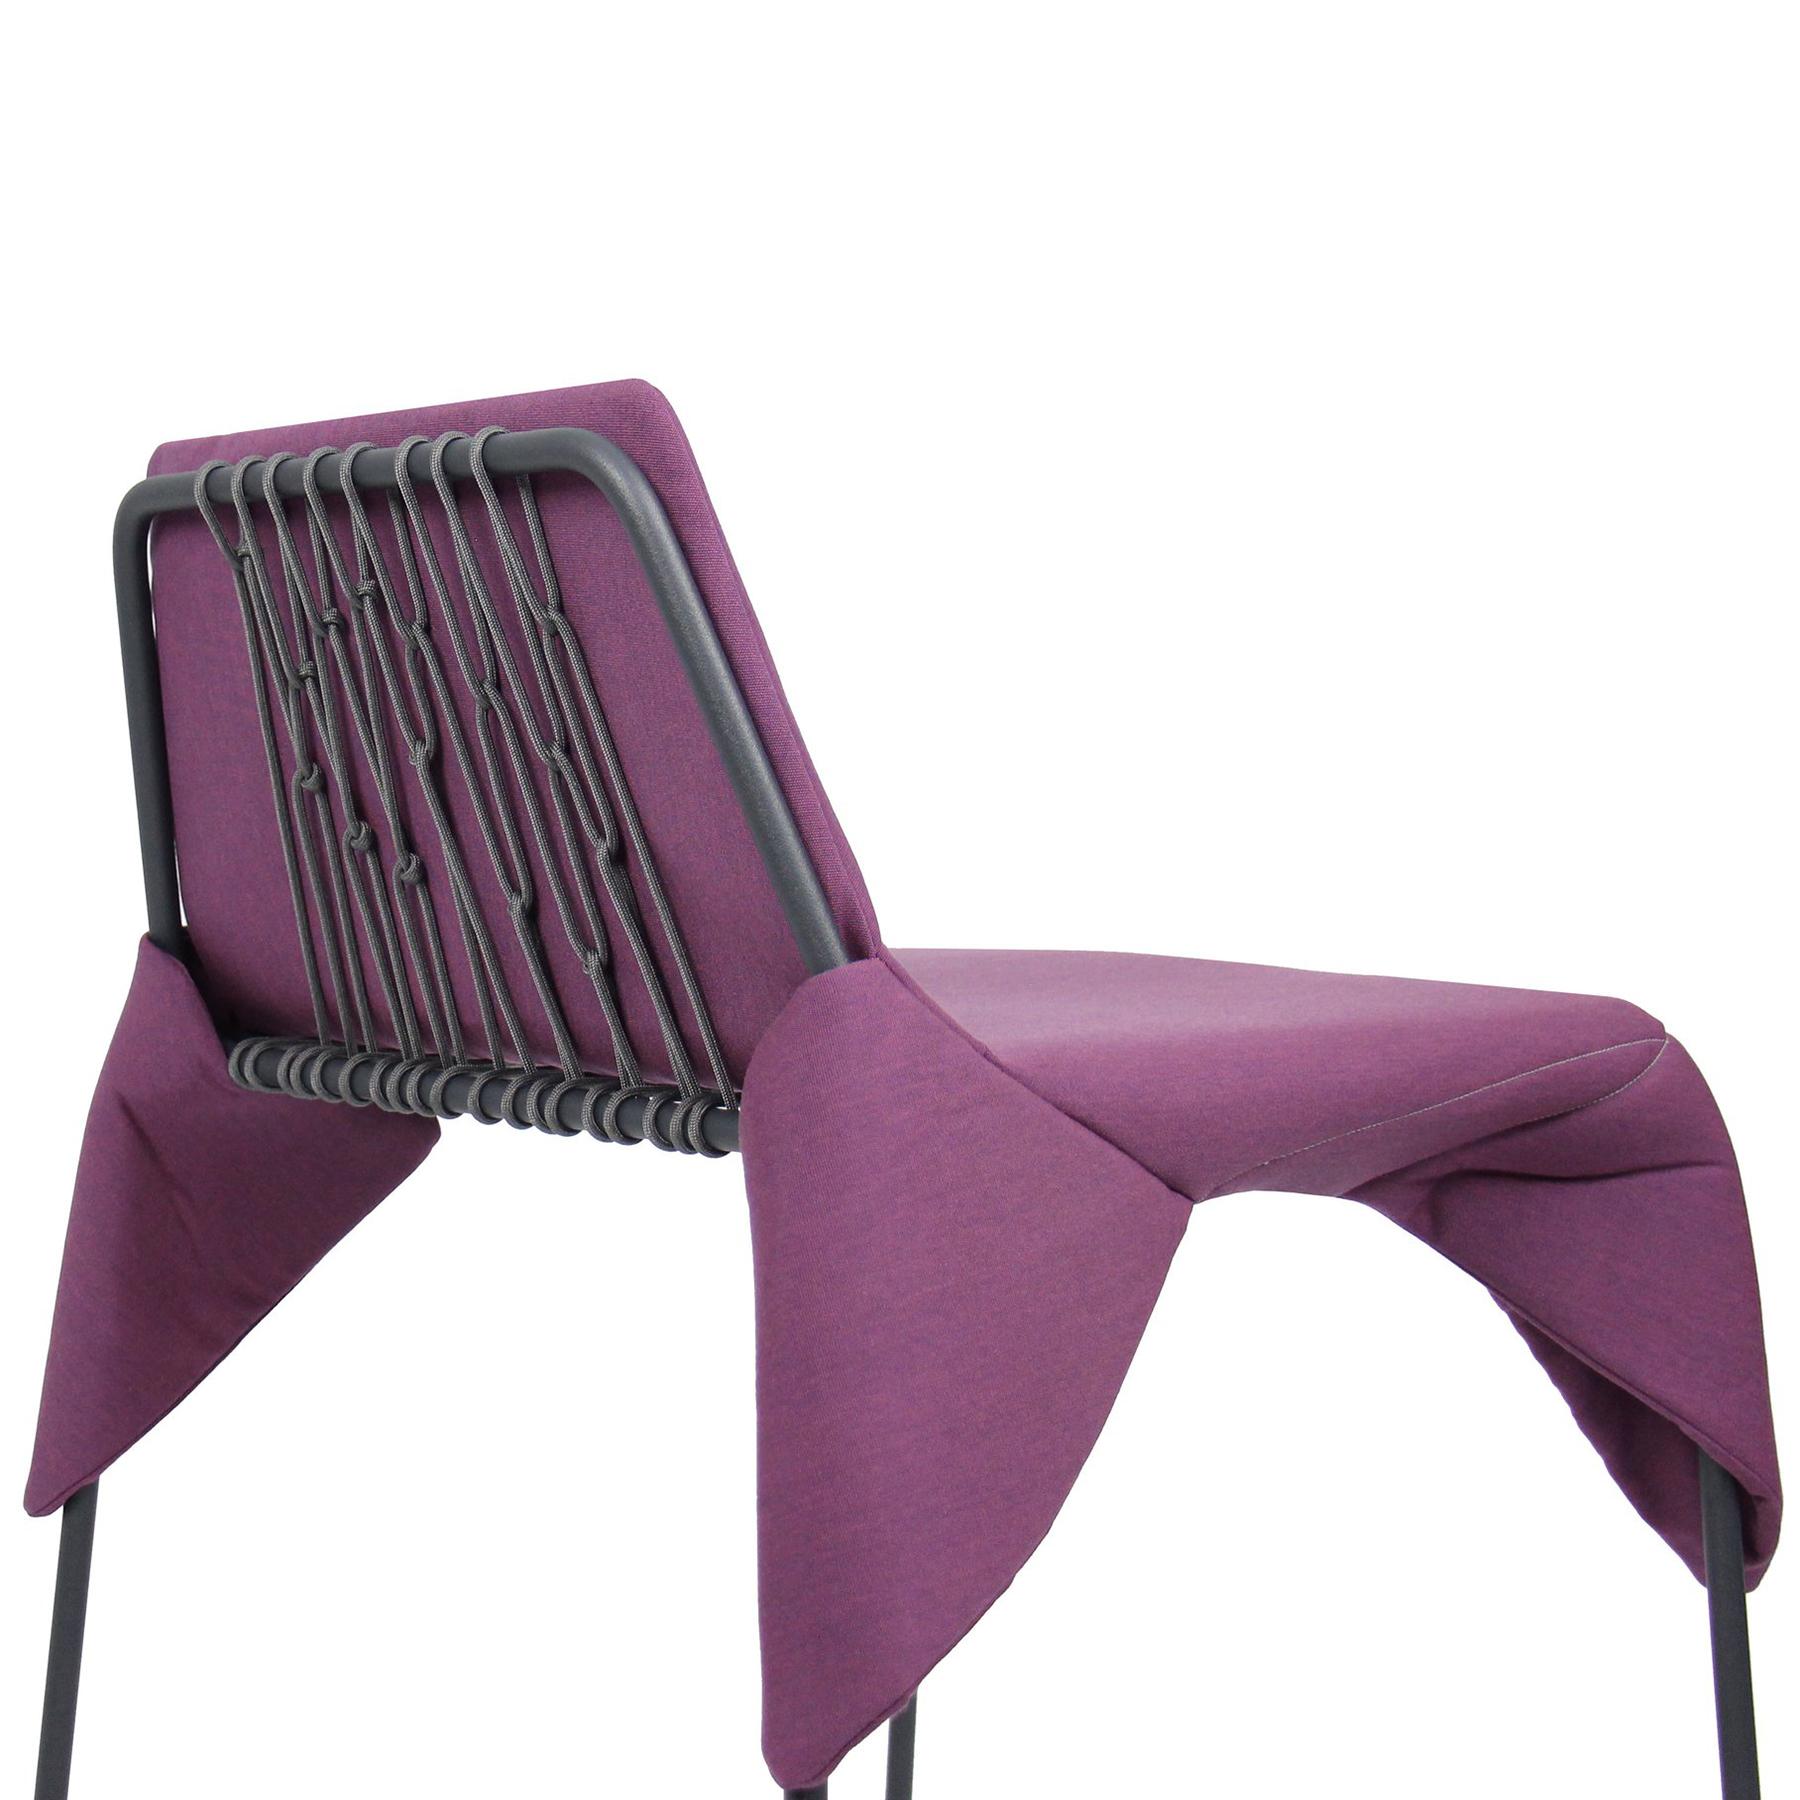 American Merkled Net Wrap Chair, Counter Height For Sale